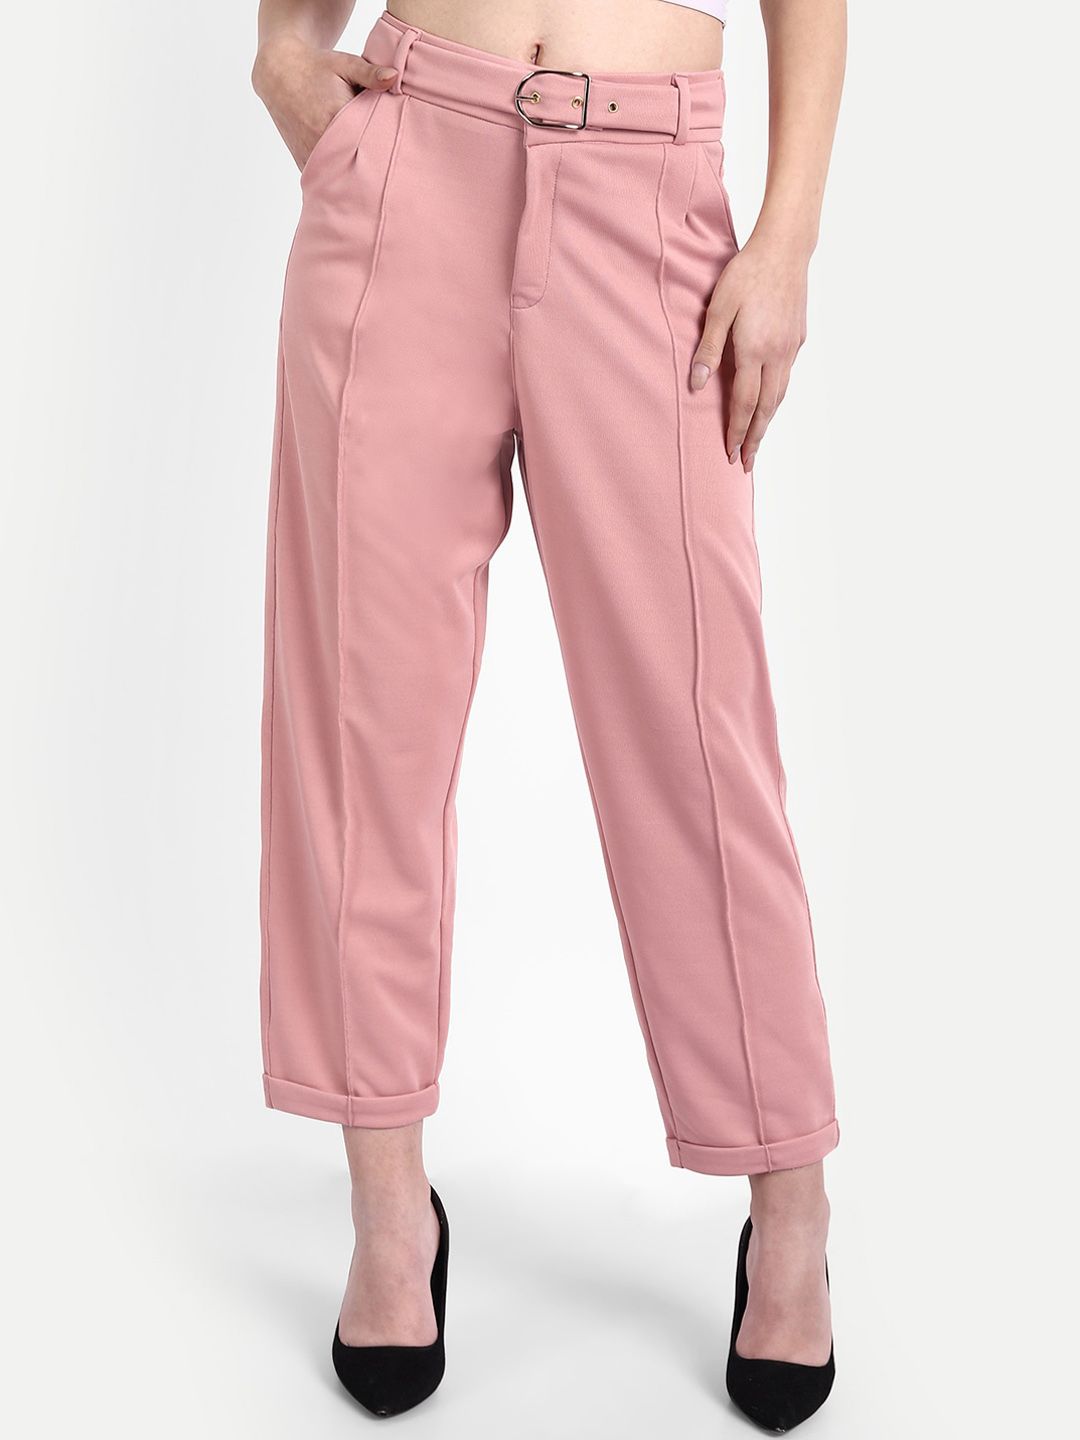 Next One Women Pink Straight Fit High-Rise Trousers Price in India